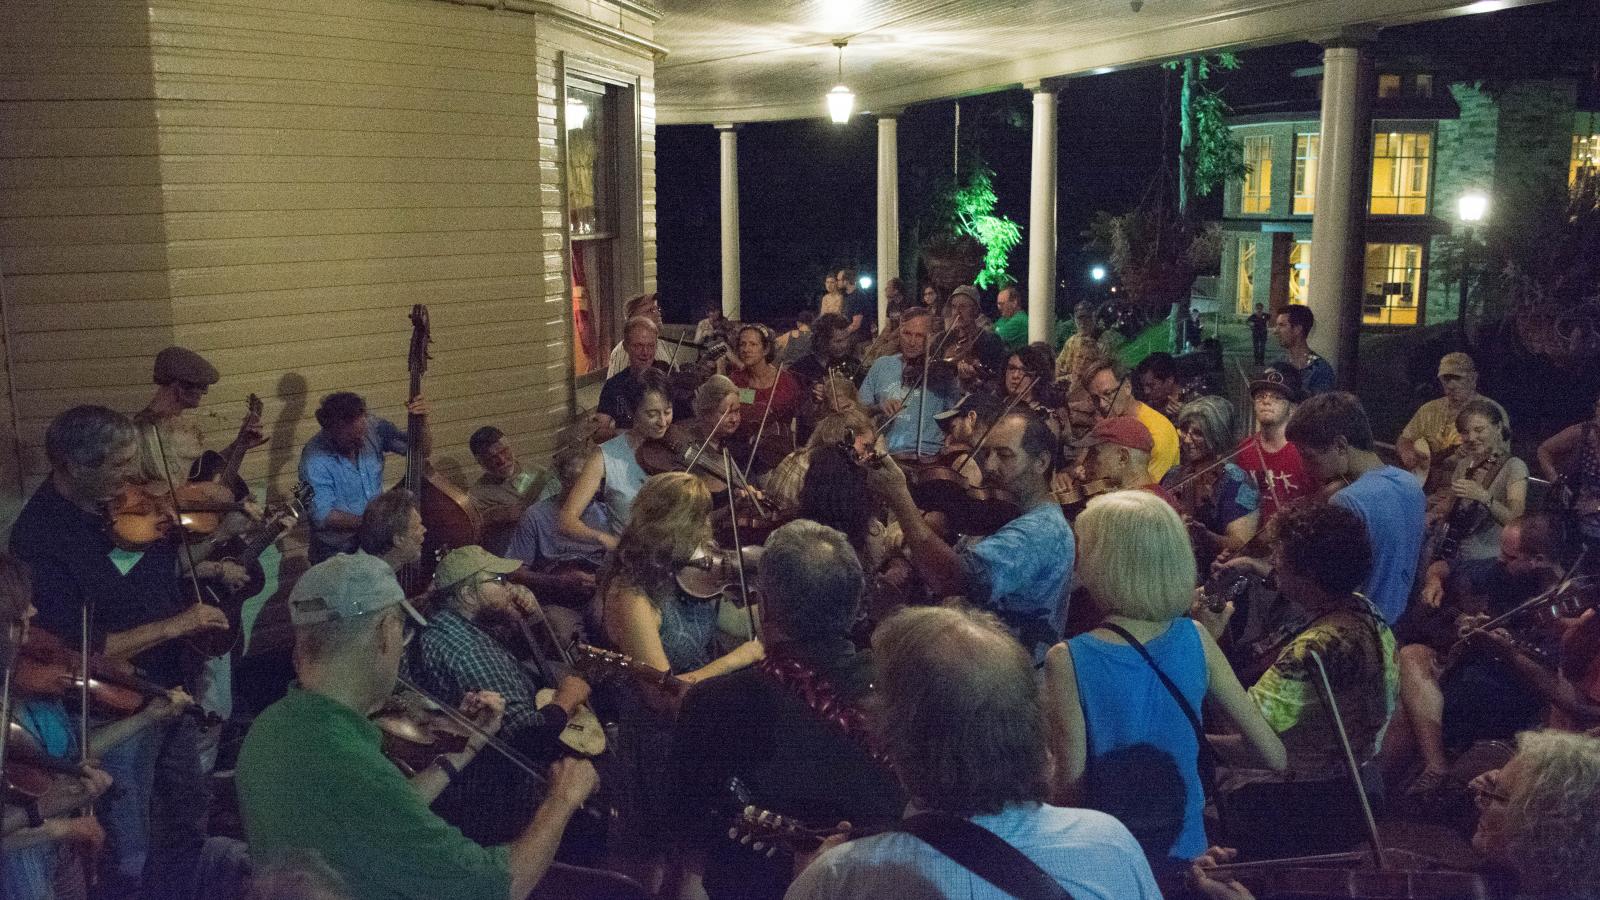 People pack together on a porch playing fiddles and basses